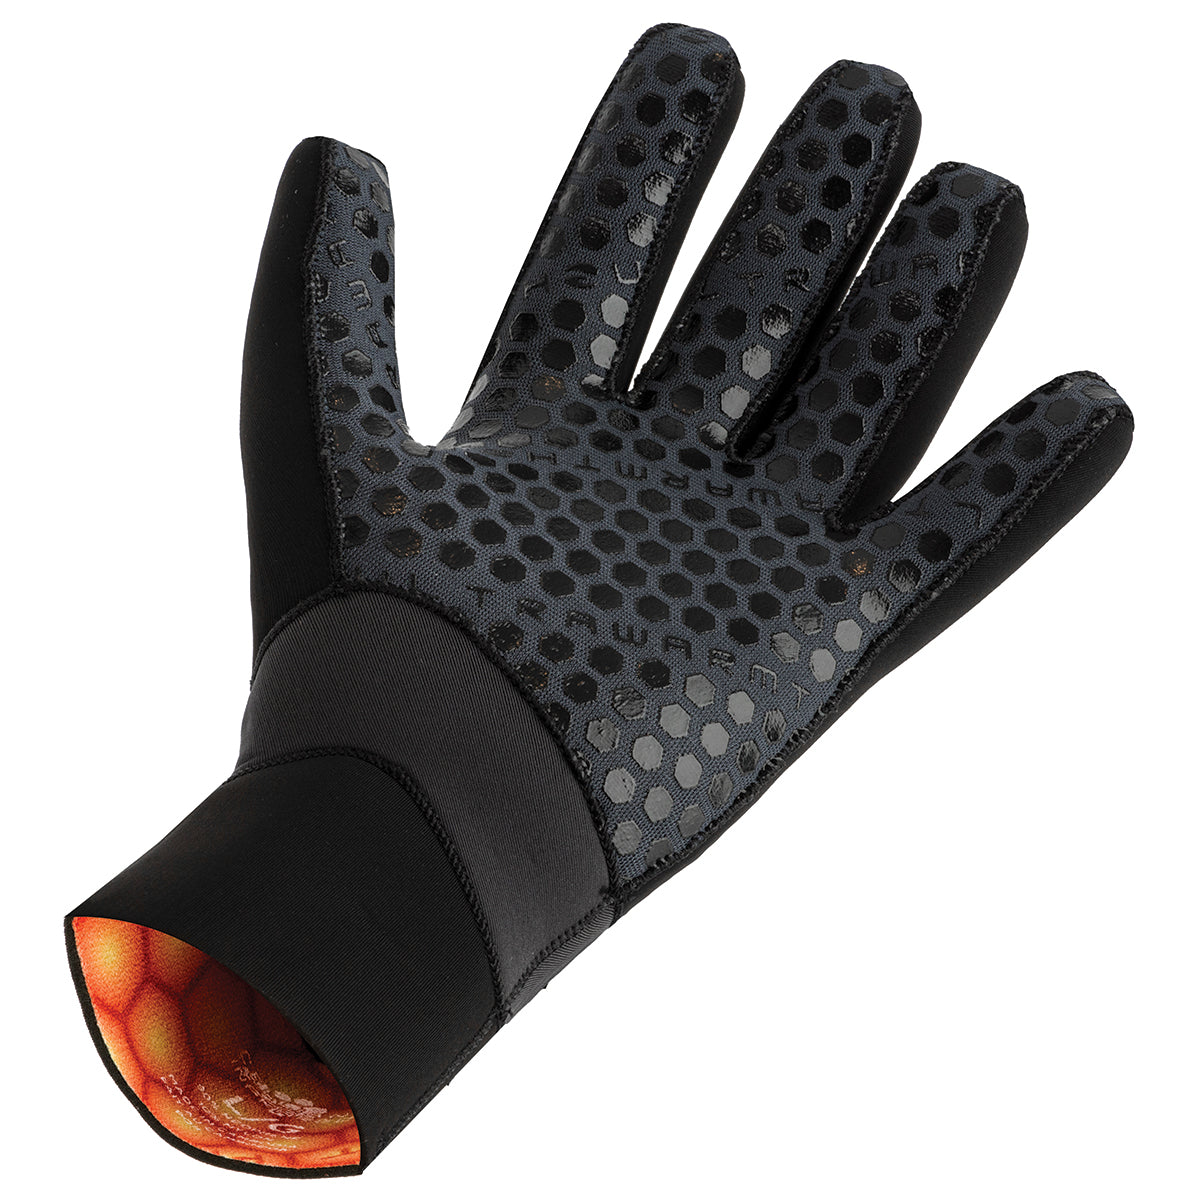 Bare 5 MM Ultrawarmth Omnired Infrared Thermal Technology Gloves